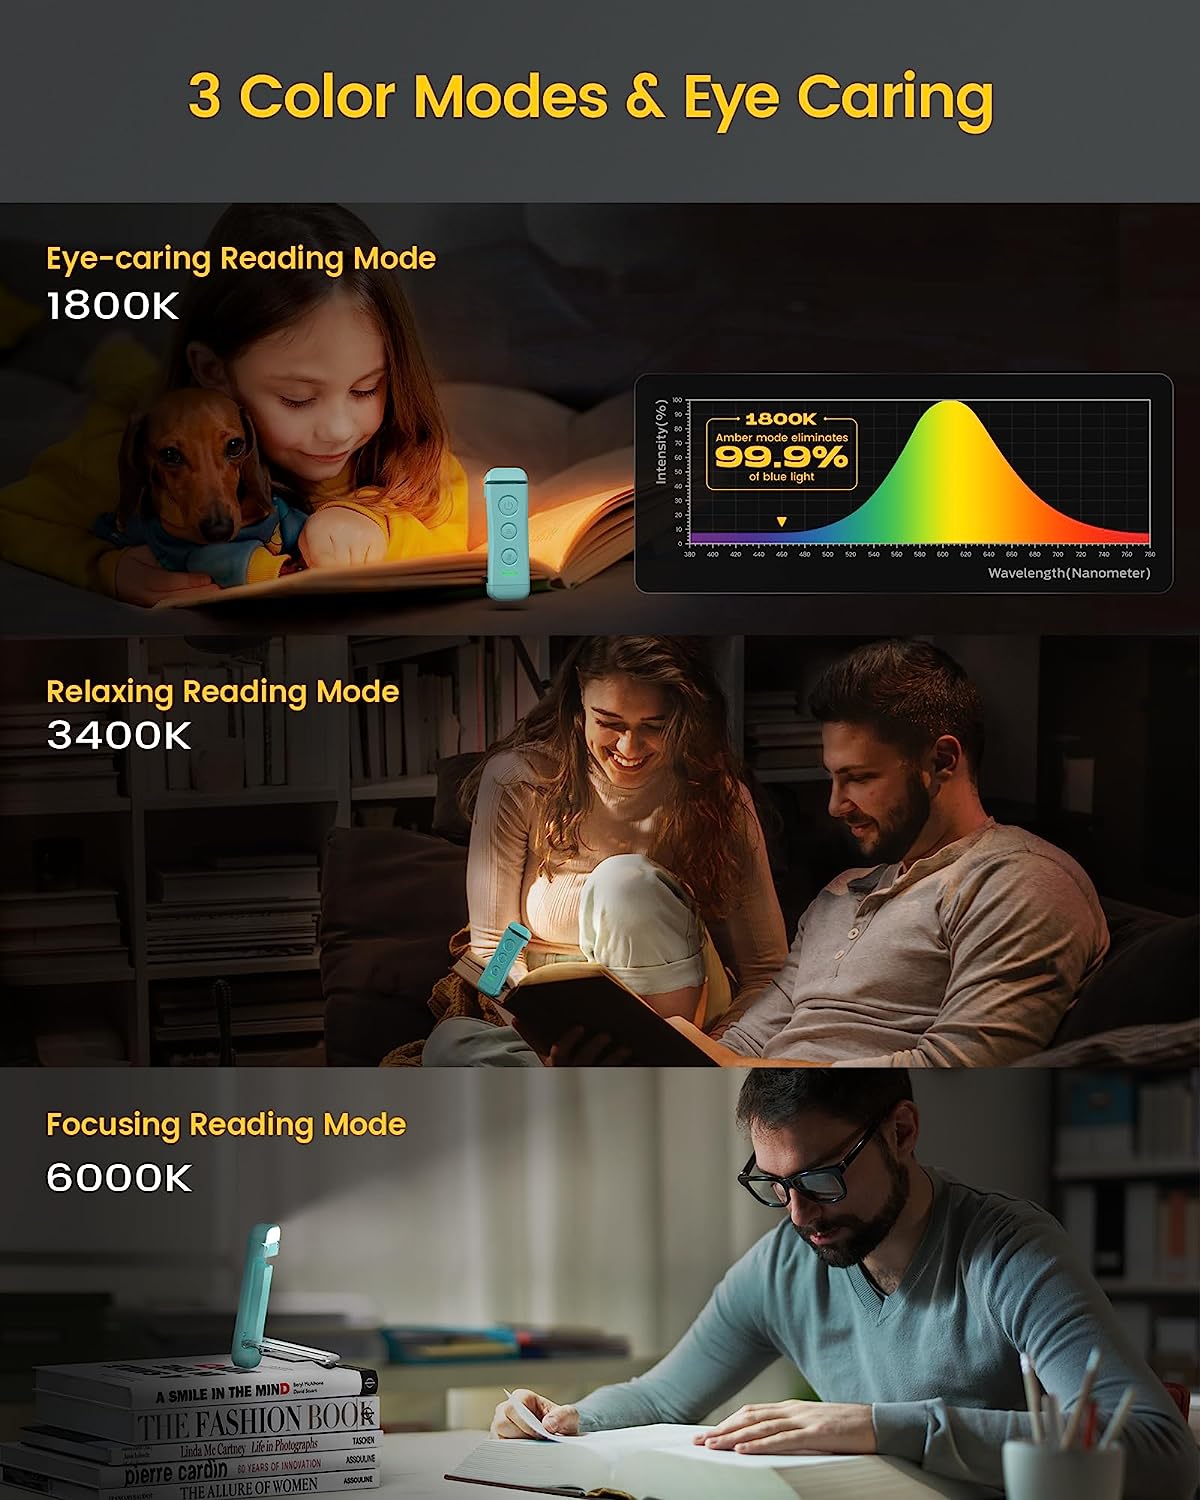 Glocusent USB Rechargeable Book Light for Reading in Bed, Portable Clip-on LED Reading Light, 3 Amber Colors & 5 Brightness Dimmable, Compact & Long Lasting, Perfect for Book Lovers, Kids - havana shop